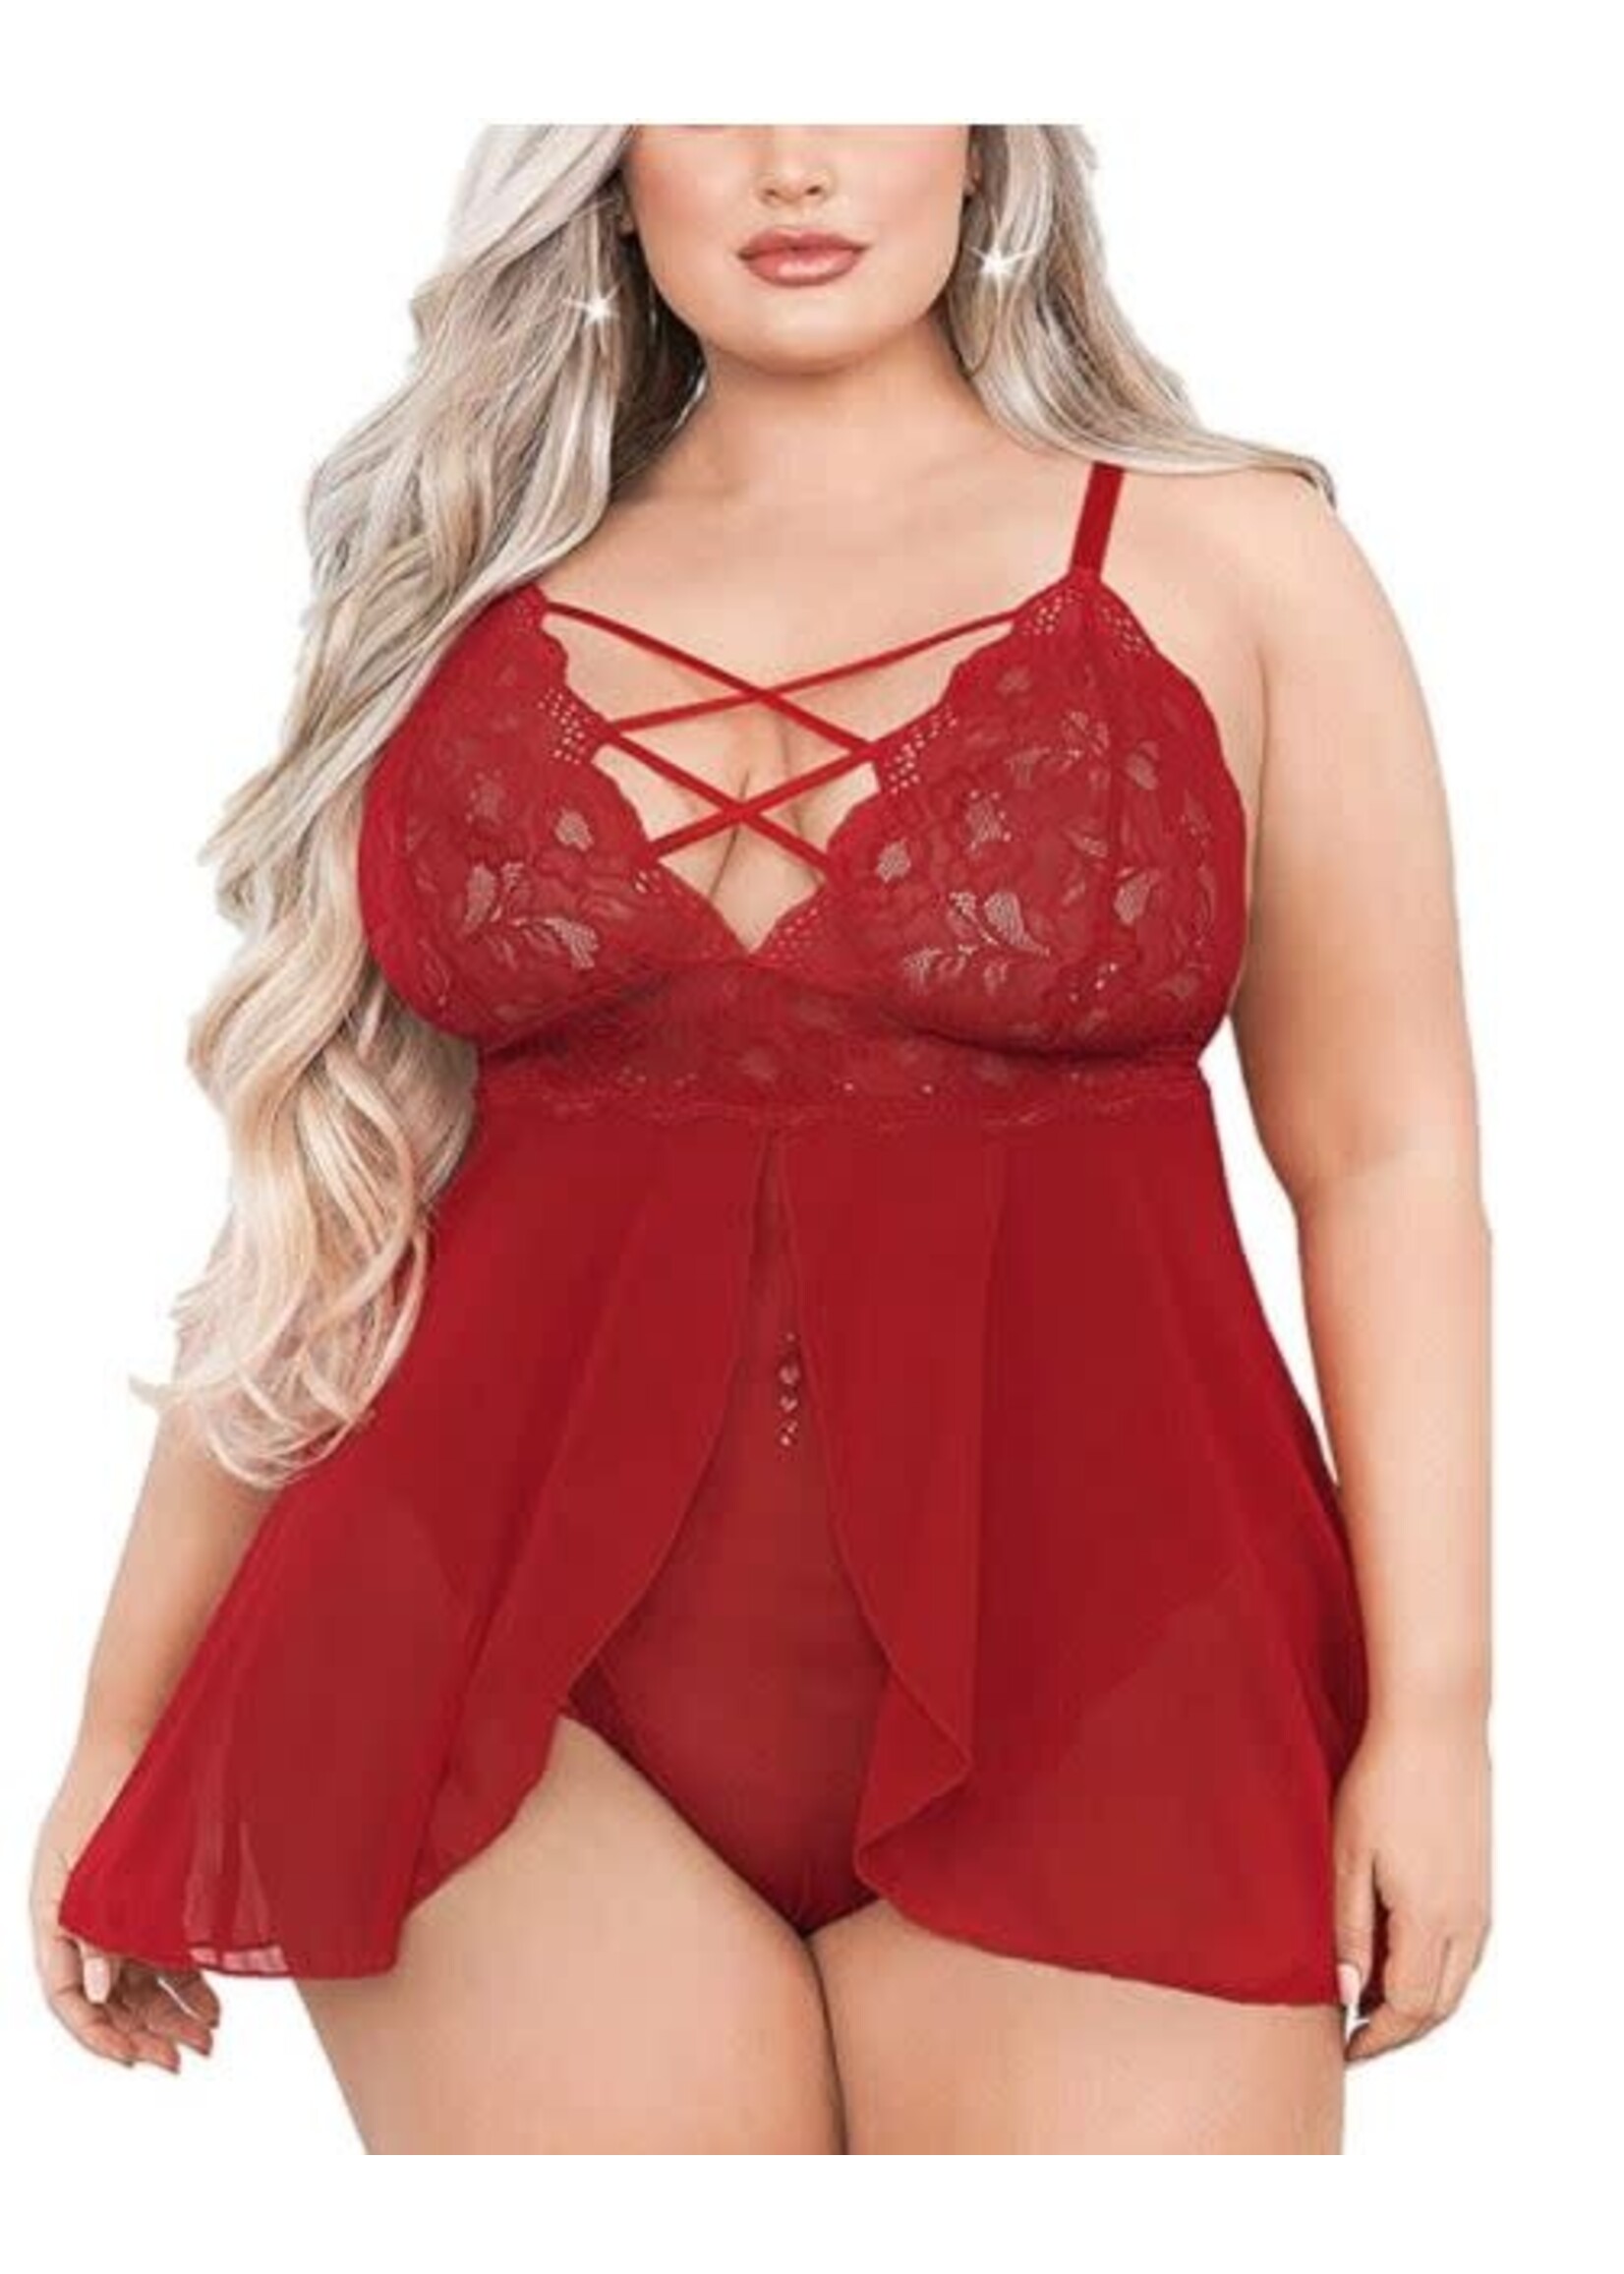 EVELUST Plus Size Sexy Lingerie for Women V-Neck High Waist Floral